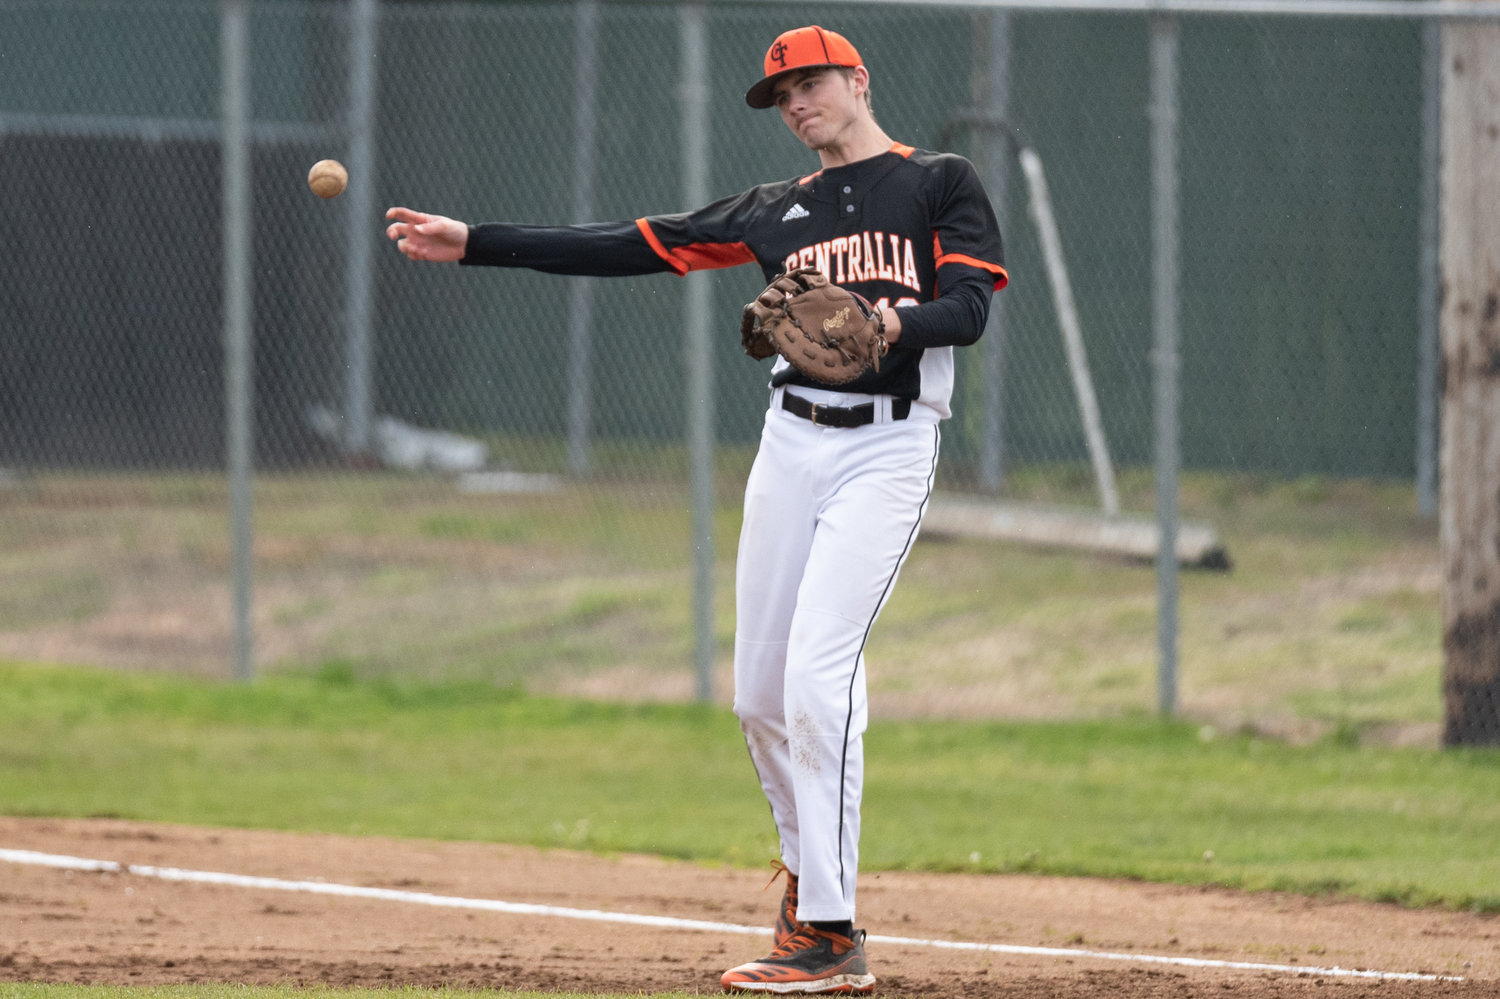 Centralia first baseman Landon Kaut looks to throw during warmups against W.F. West April 28.